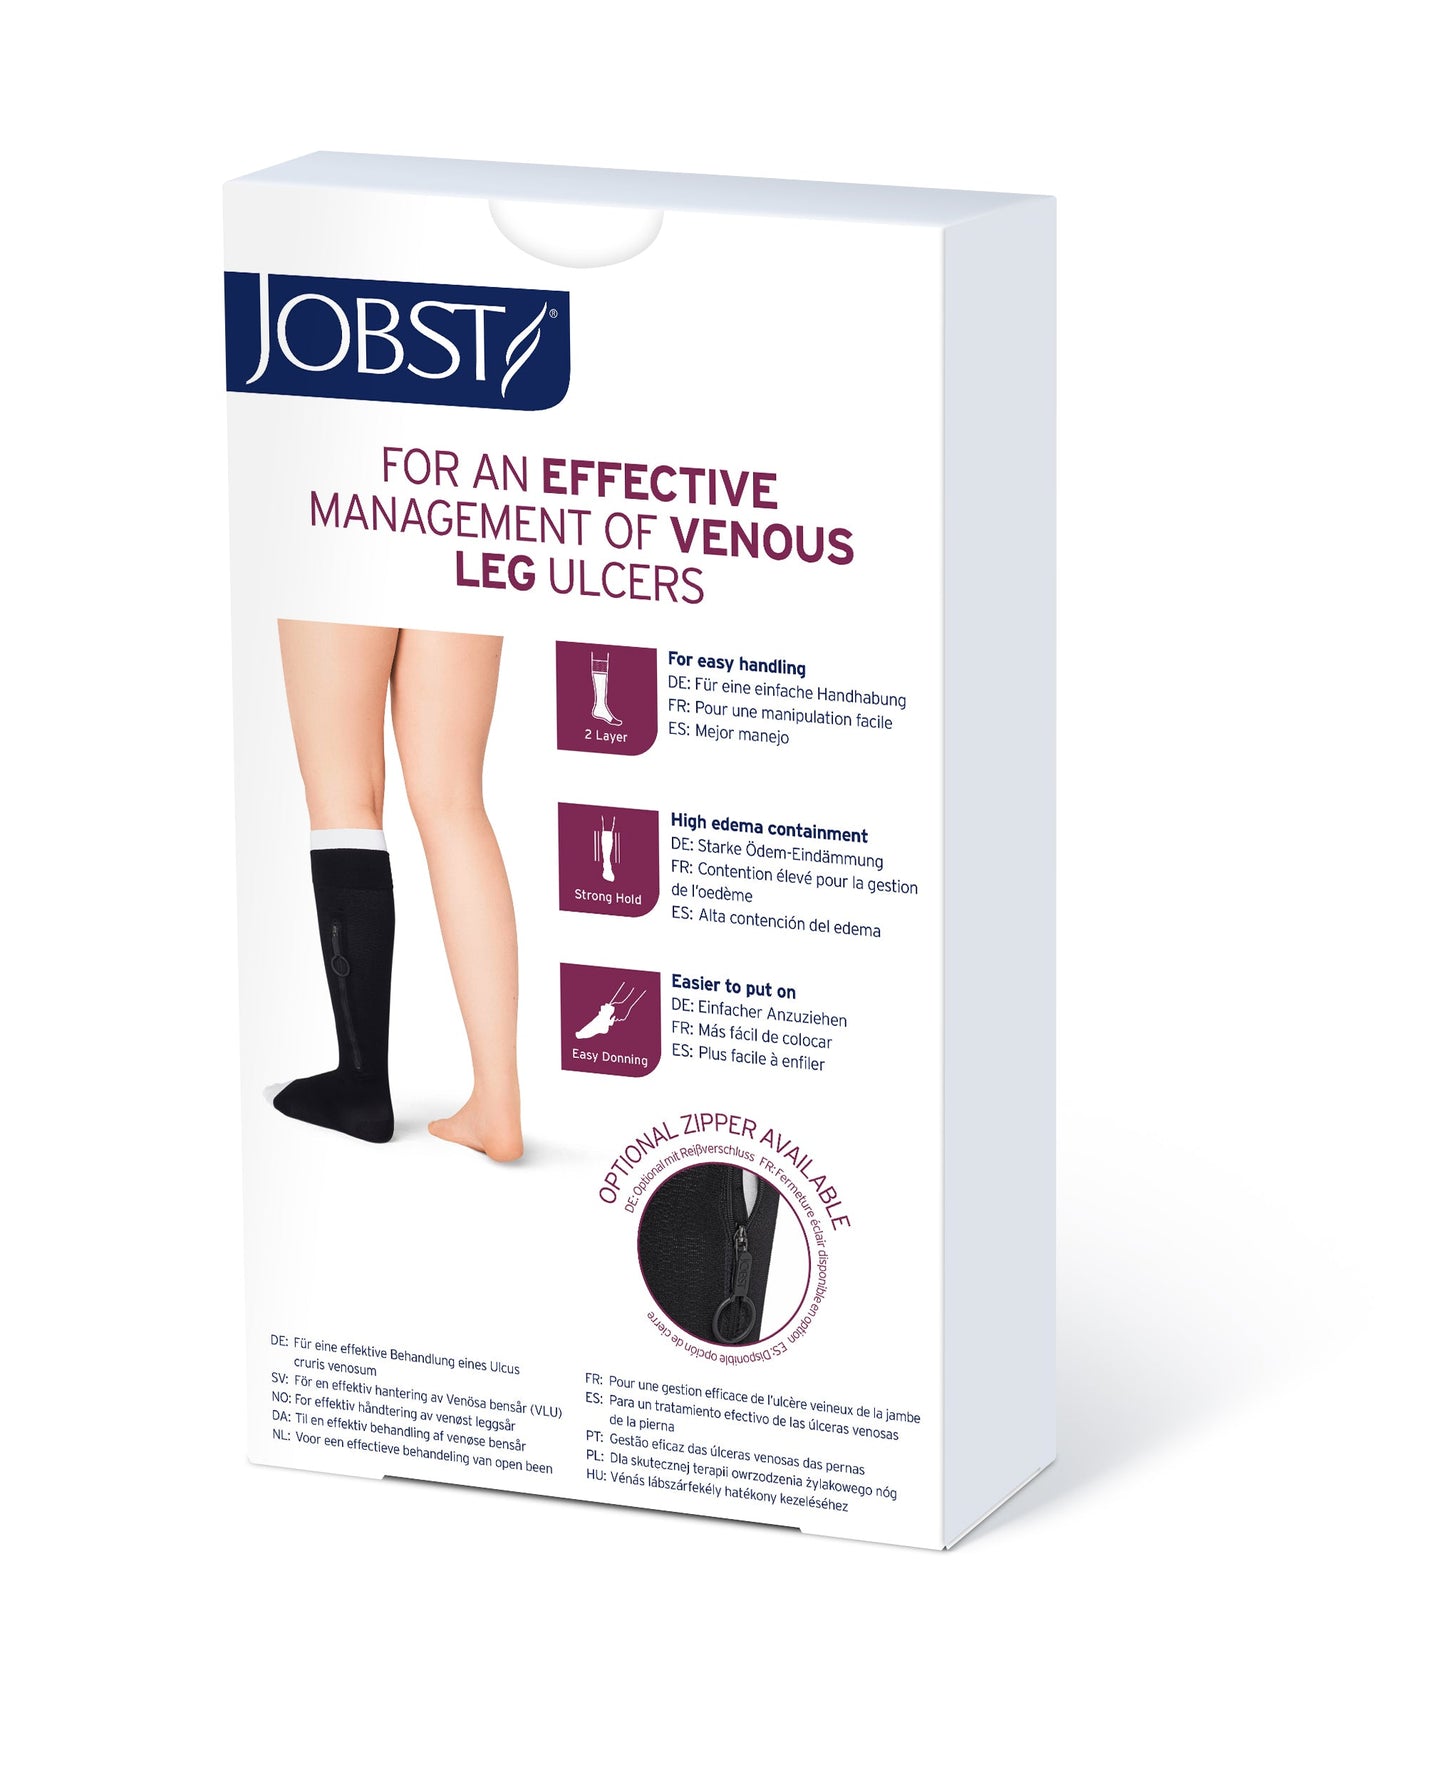 JOBST UlcerCARE 2-Part Compression System with Liners 40+ mmHg Knee High Open Toe With Zipper